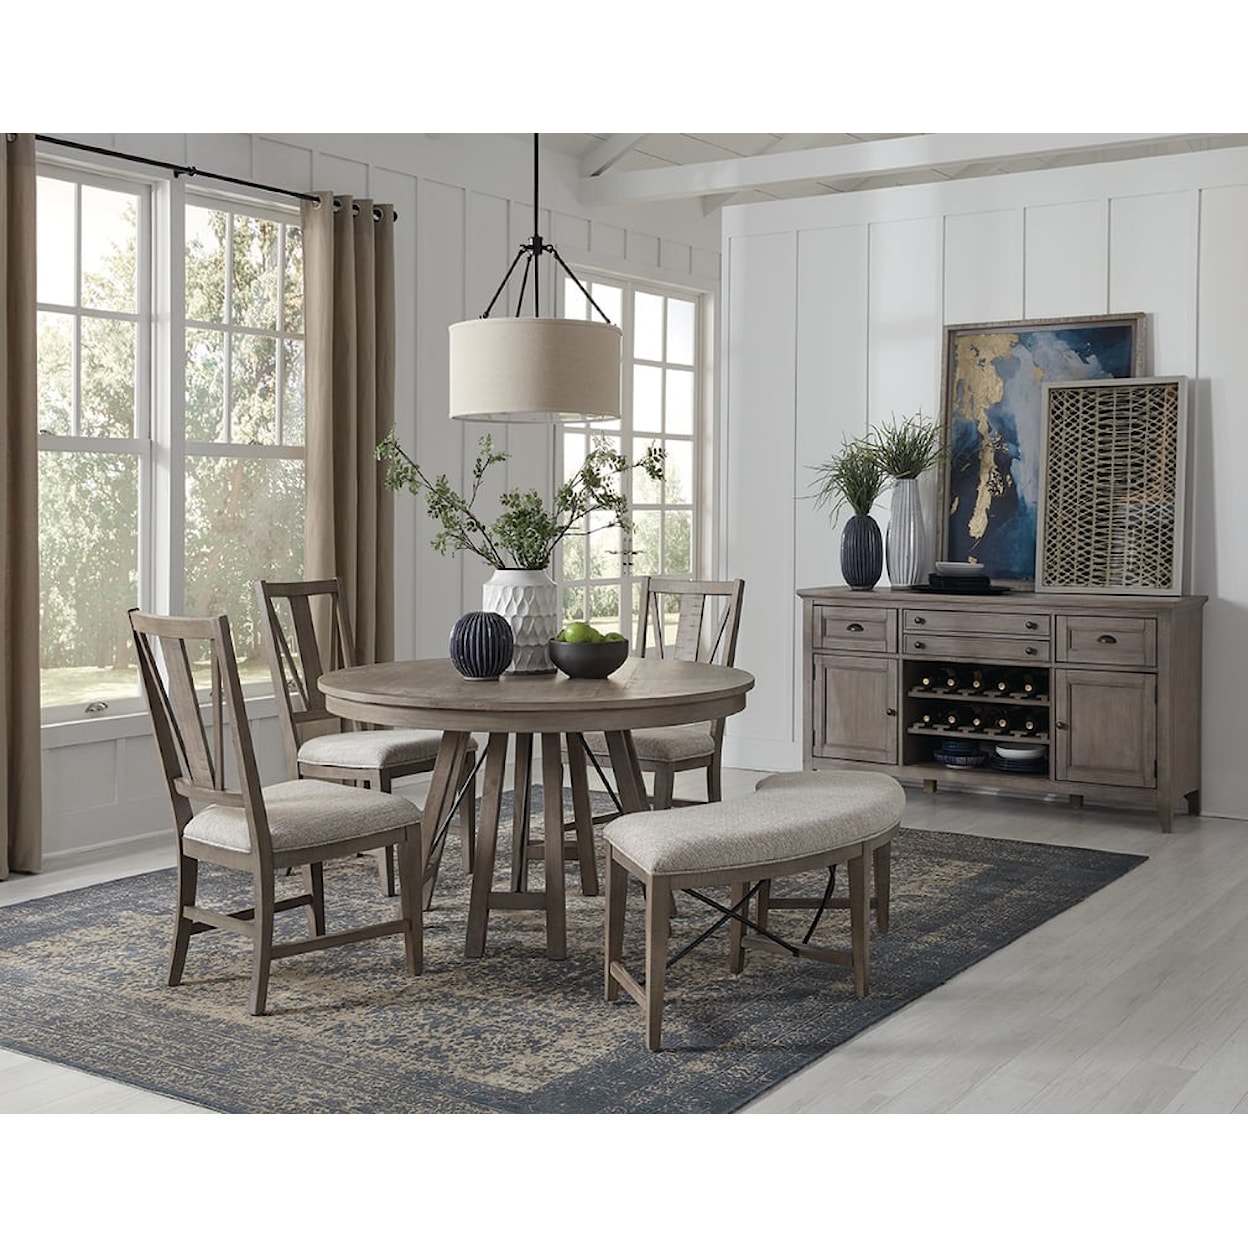 Magnussen Home Paxton Place Dining Round Dining Table